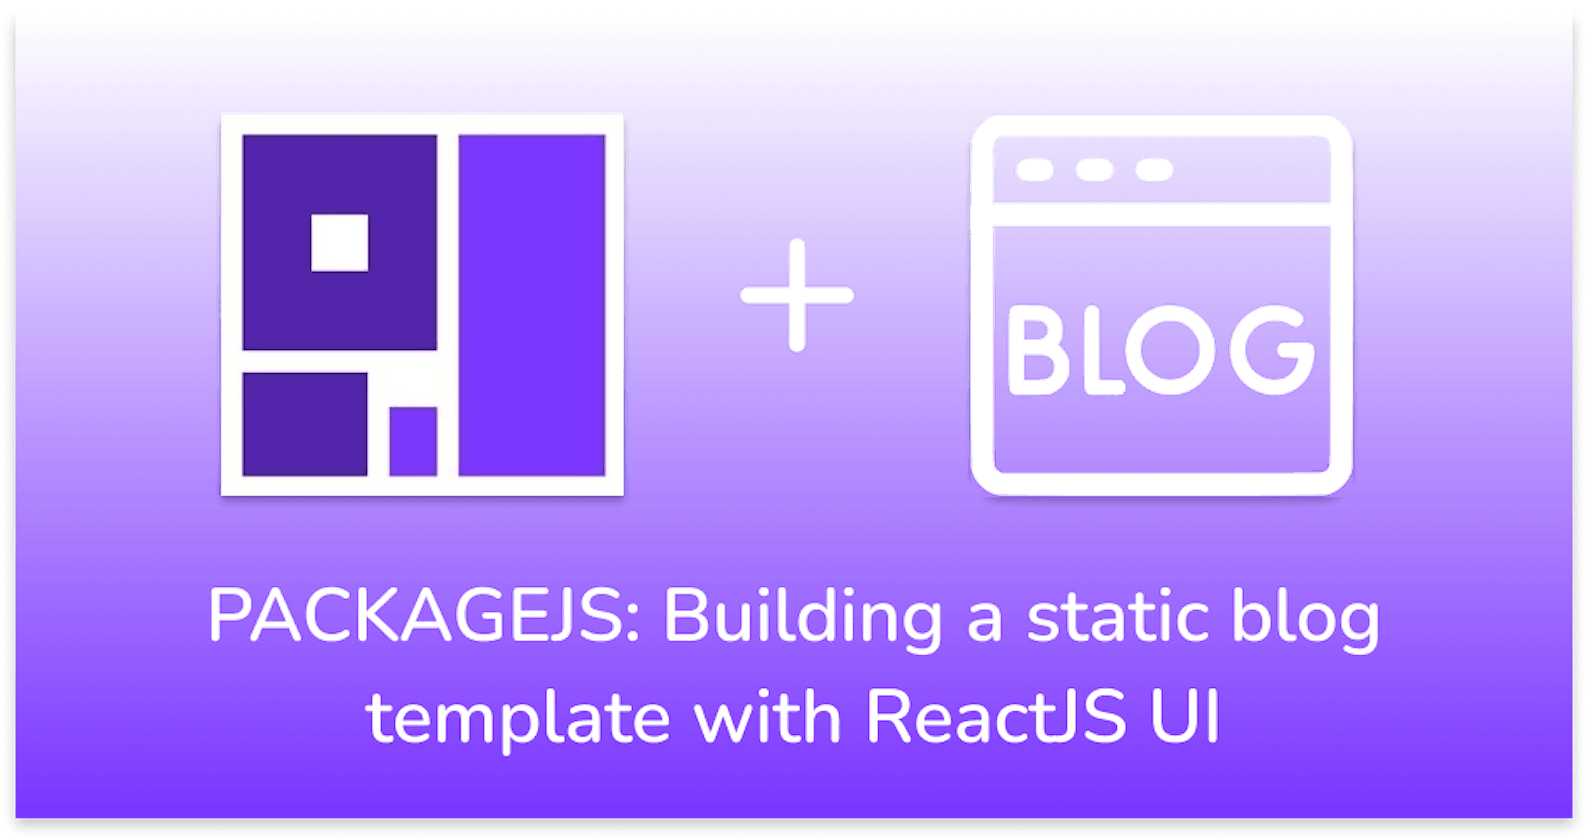 PACKAGEJS: Building a static blog template with ReactJS UI